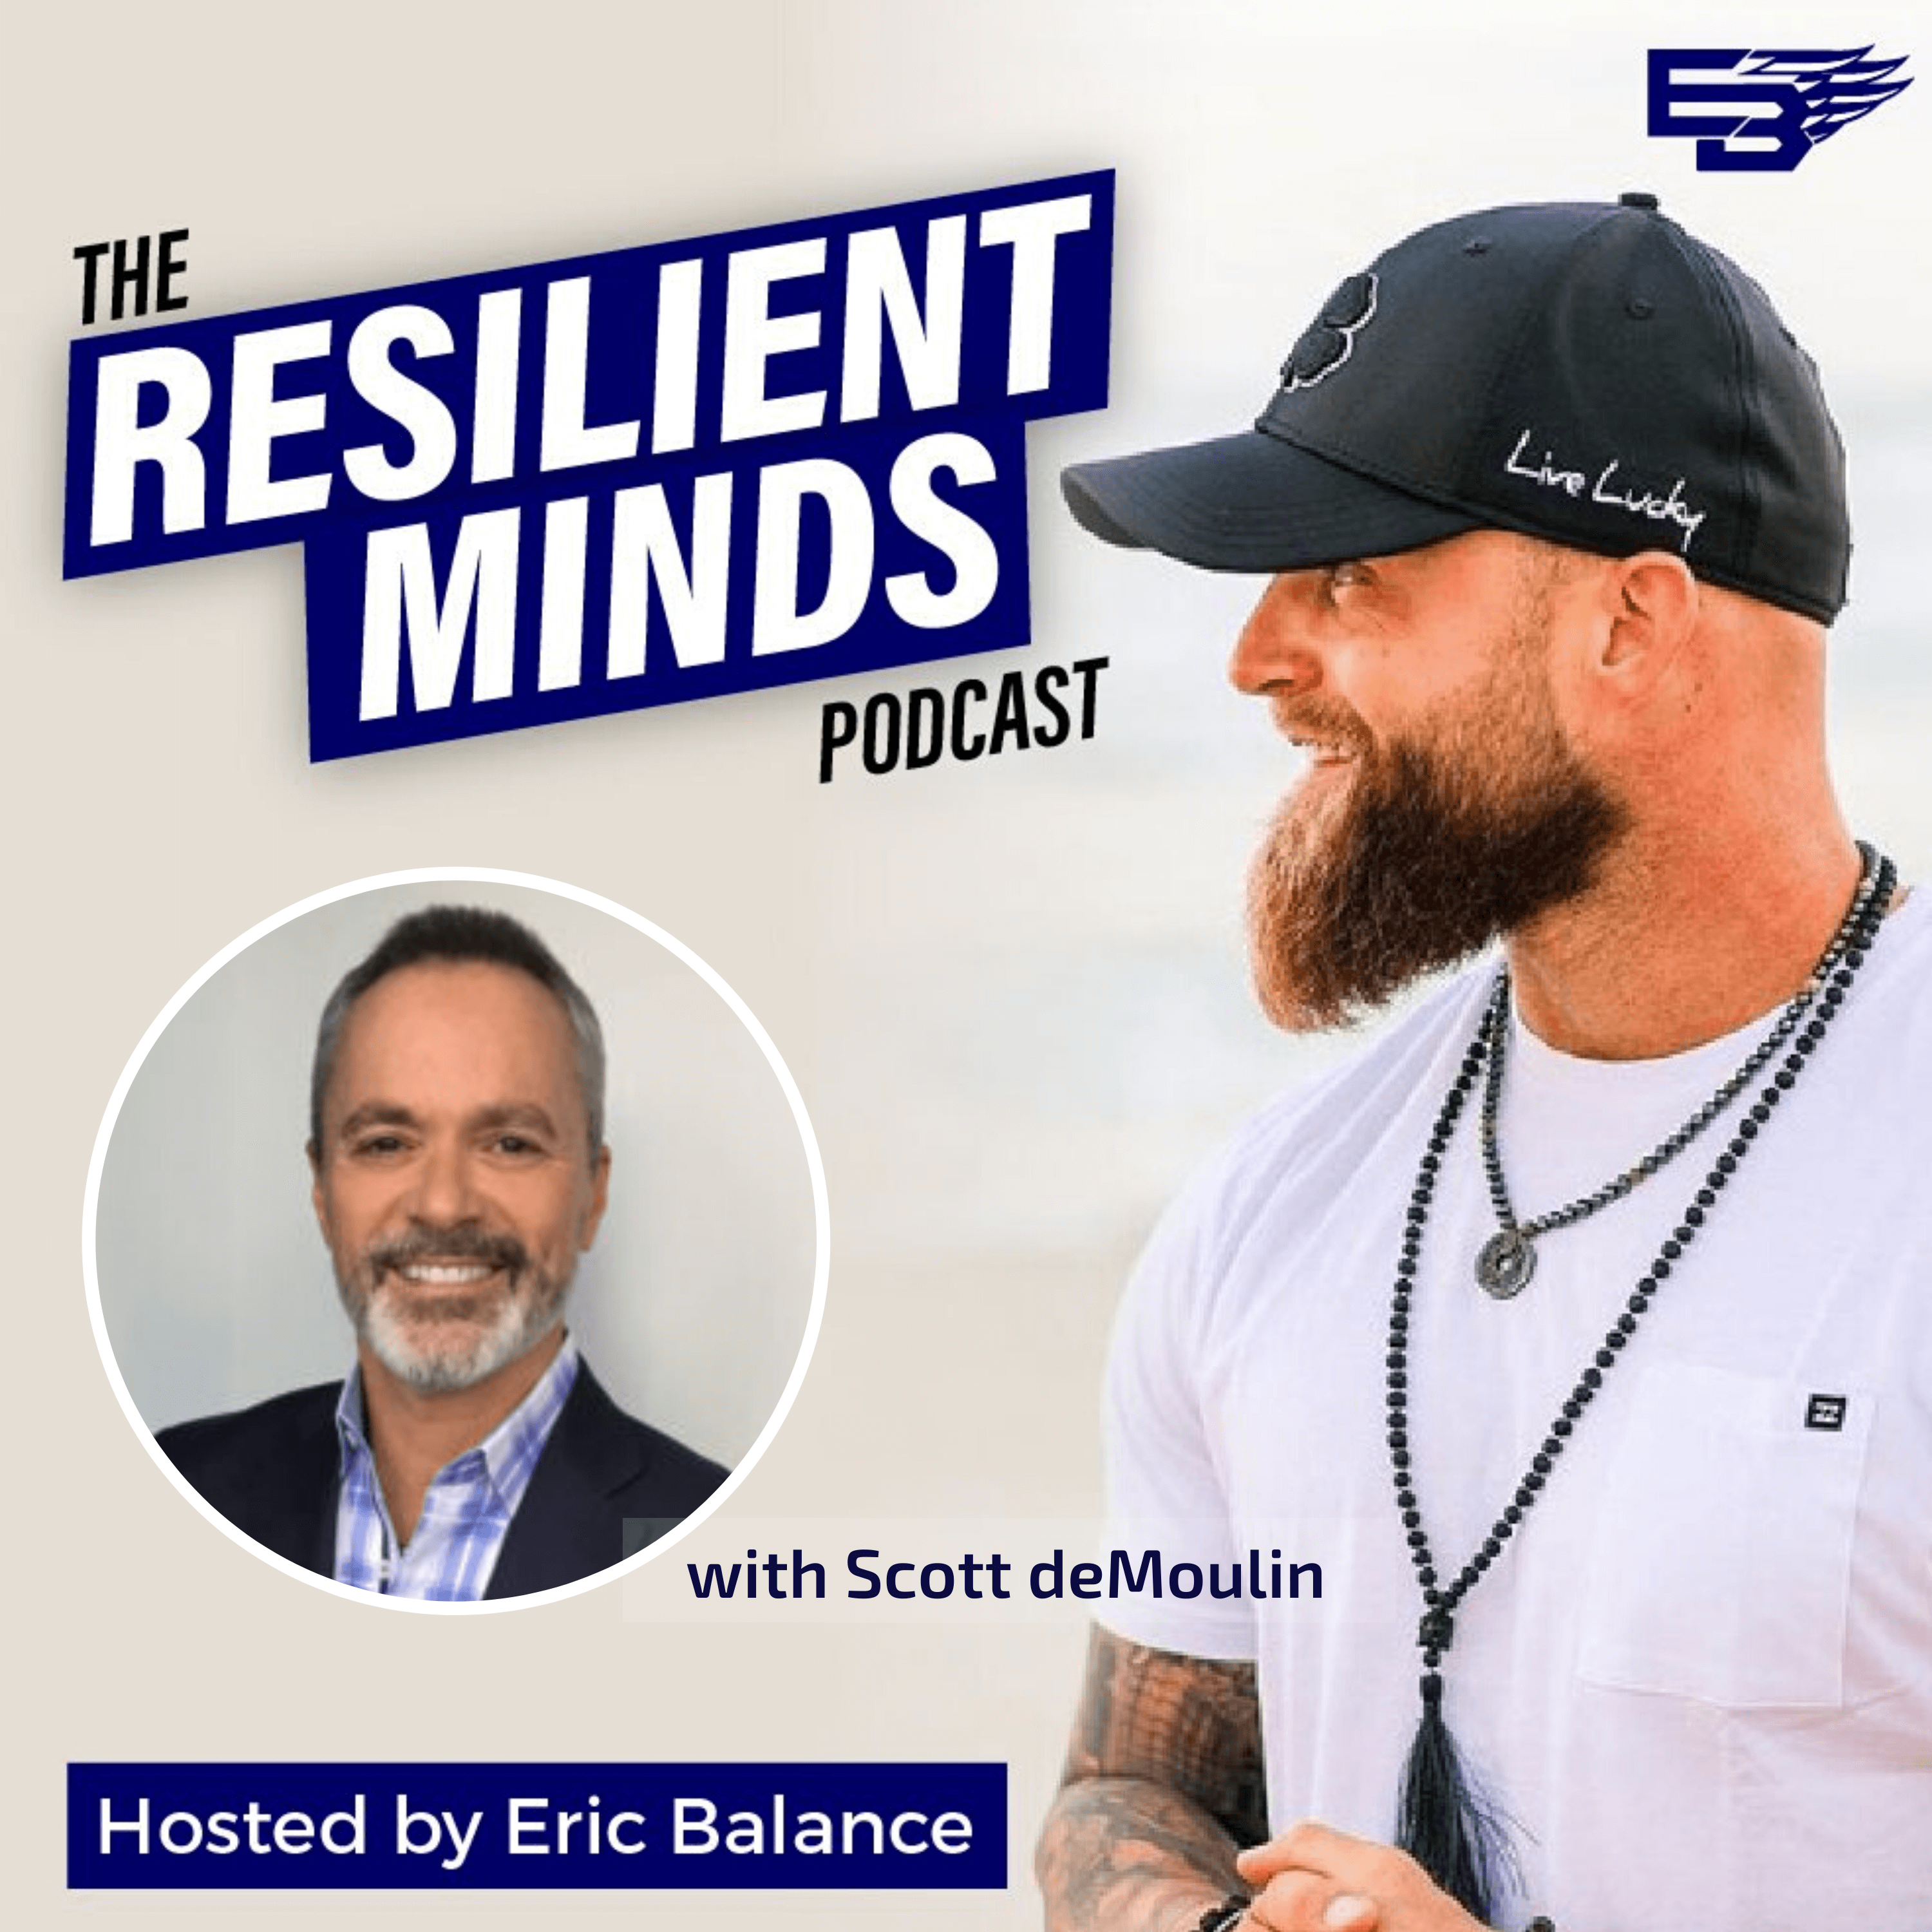 Episode 20 – How to Create an Integrity Based Business with Scott de Moulin.